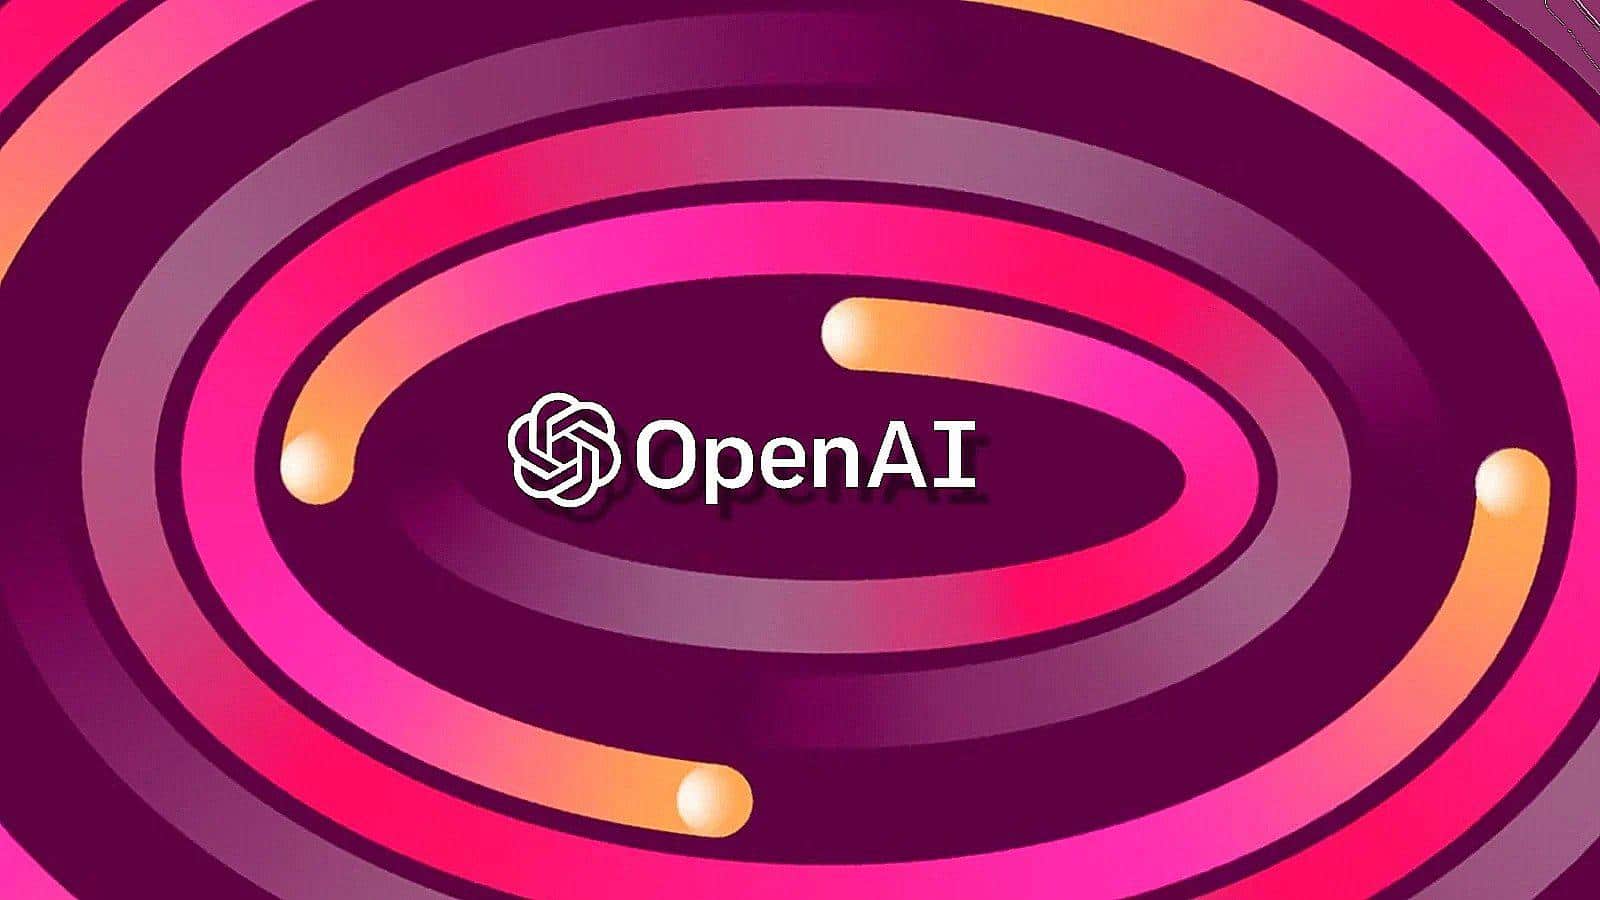 OpenAI launches bug bounty program with rewards up to $20K